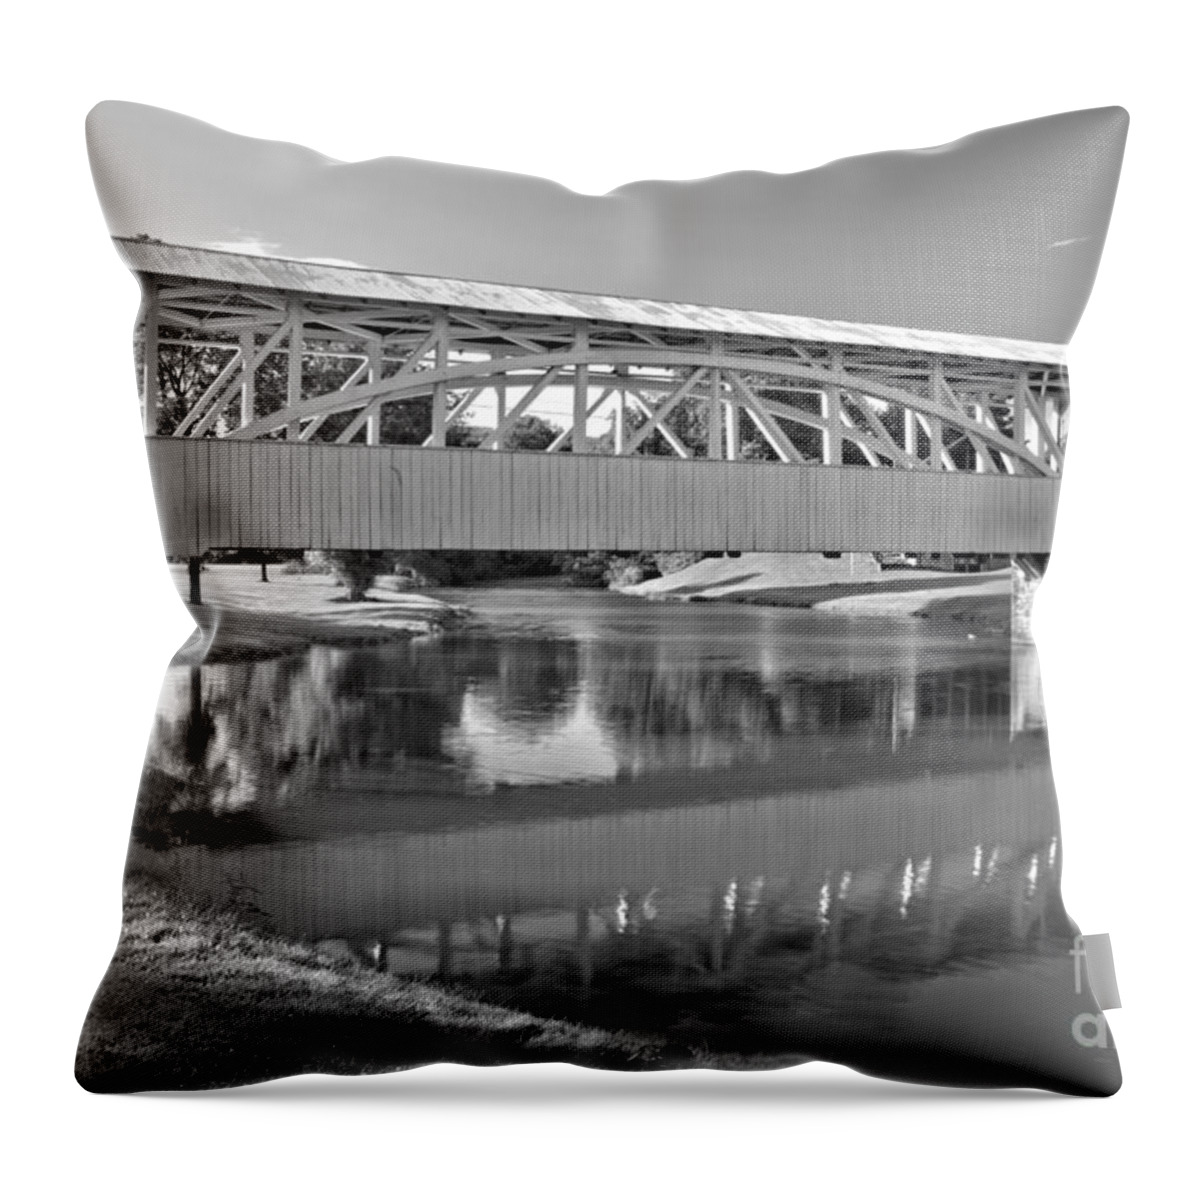 Halls Mill Covered Bridge Throw Pillow featuring the photograph Reflections Of The Halls Mill Covered Bridge Black And White by Adam Jewell